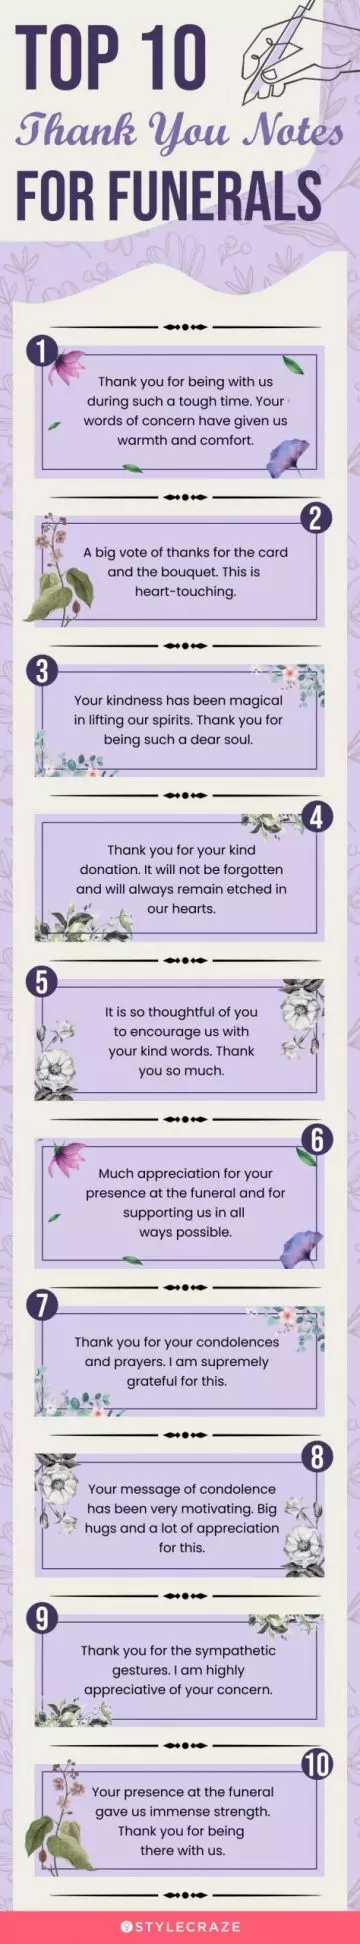 top 10 thank you notes for funeral (infographic)